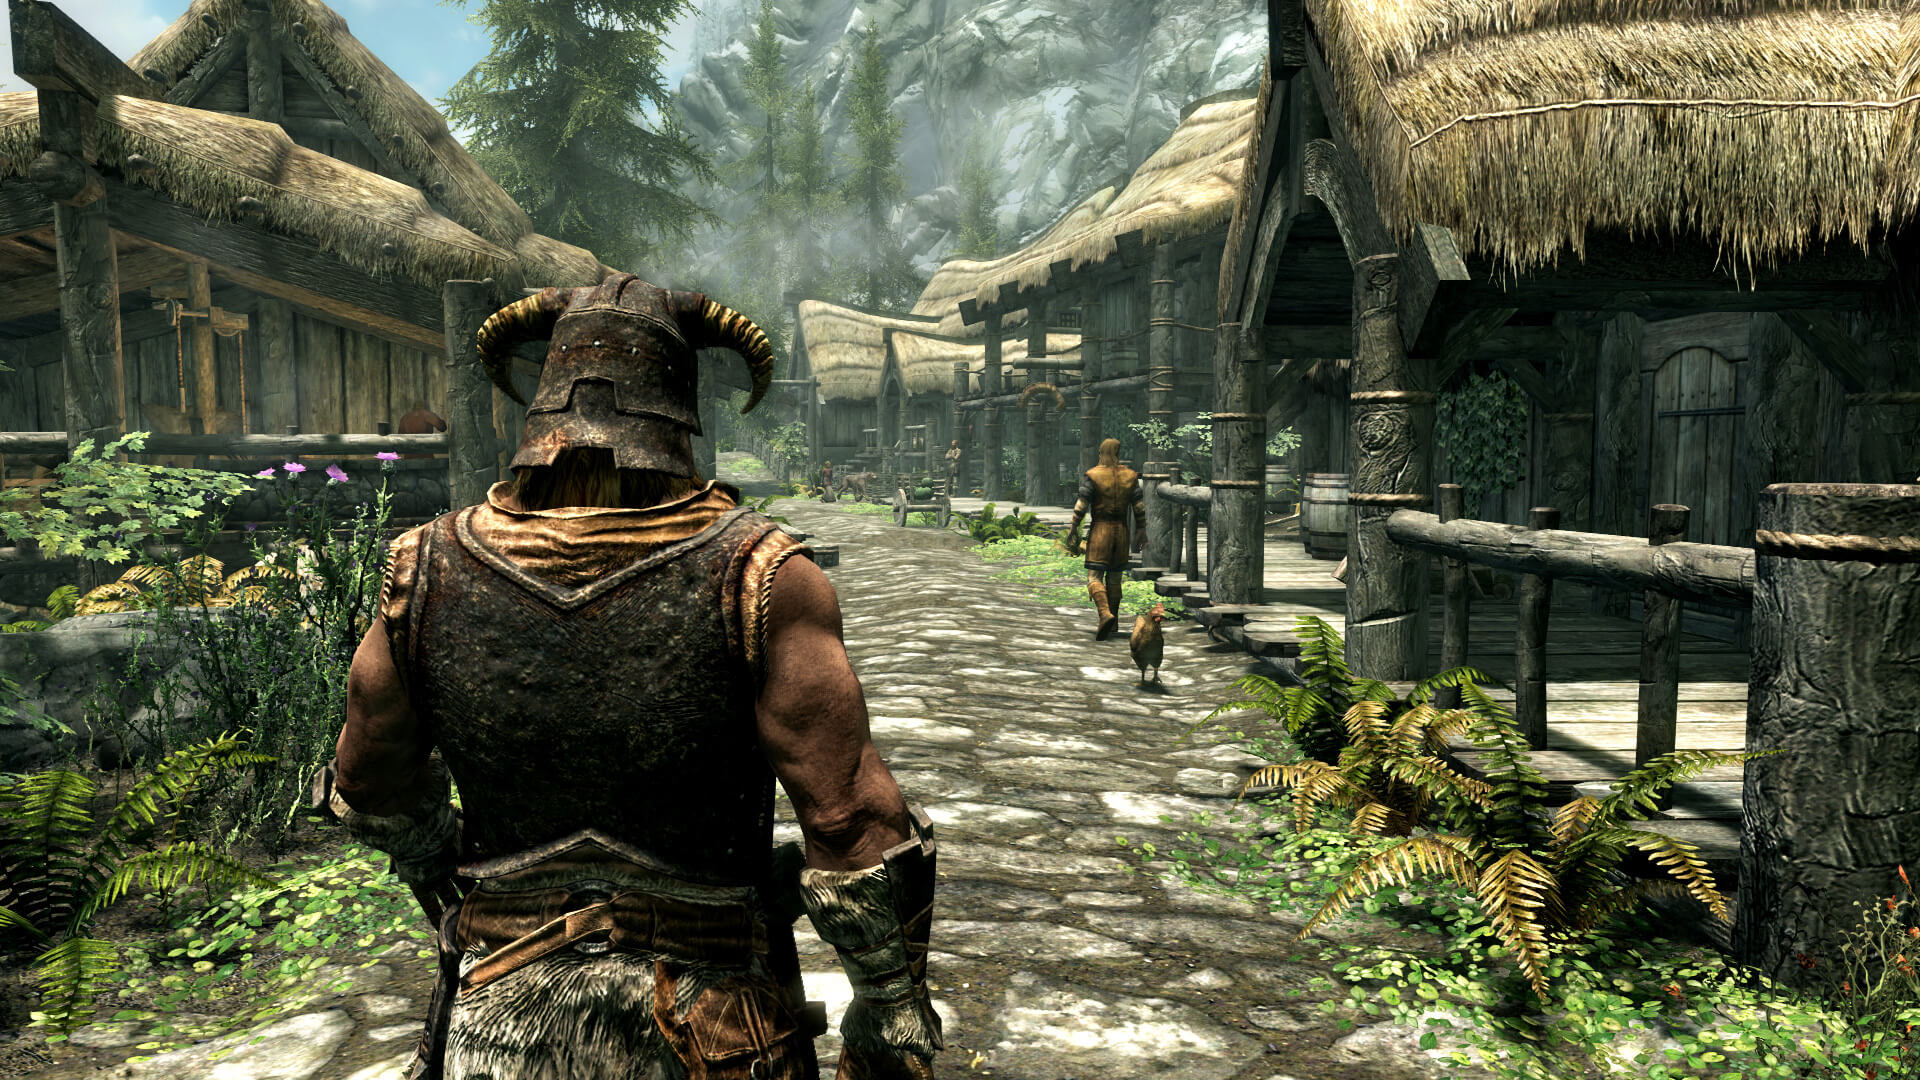 The Dragonborn walking through a village in Skyrim, one of GOG's biggest games in 2022